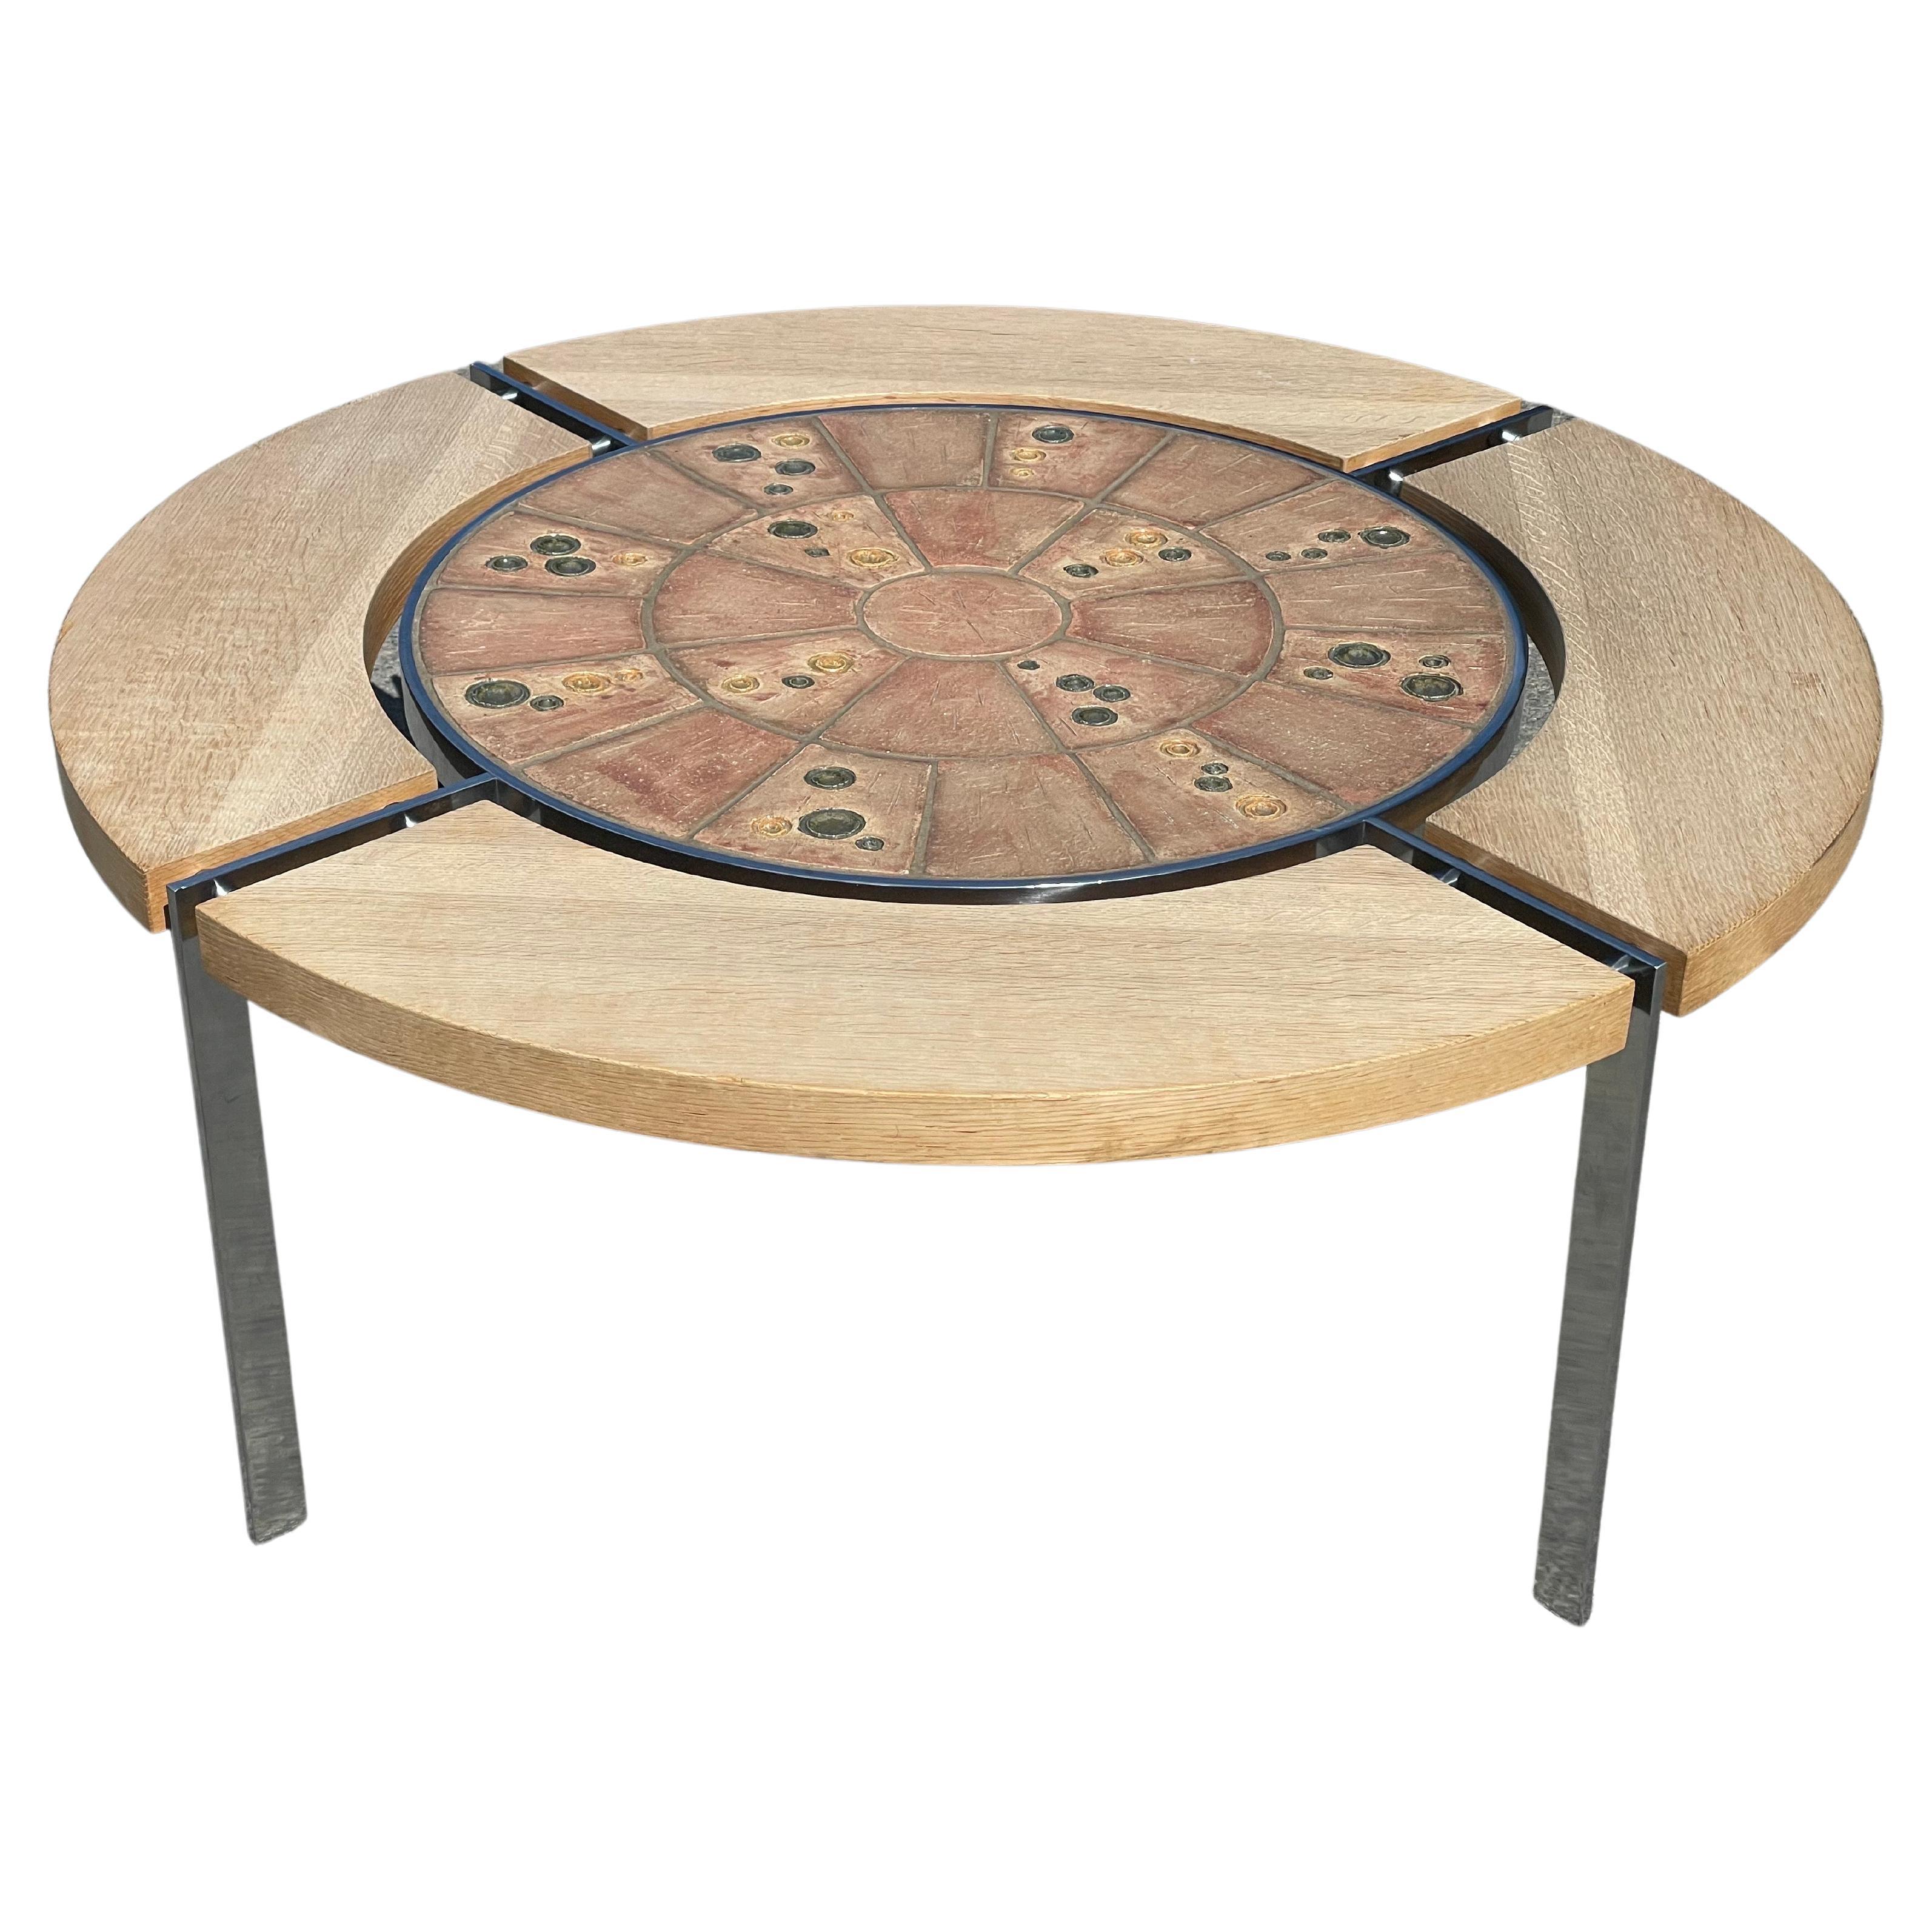 Rare Danish Mid-Century Modern Coffee Table by Svend Aage Jessen from 1970 For Sale